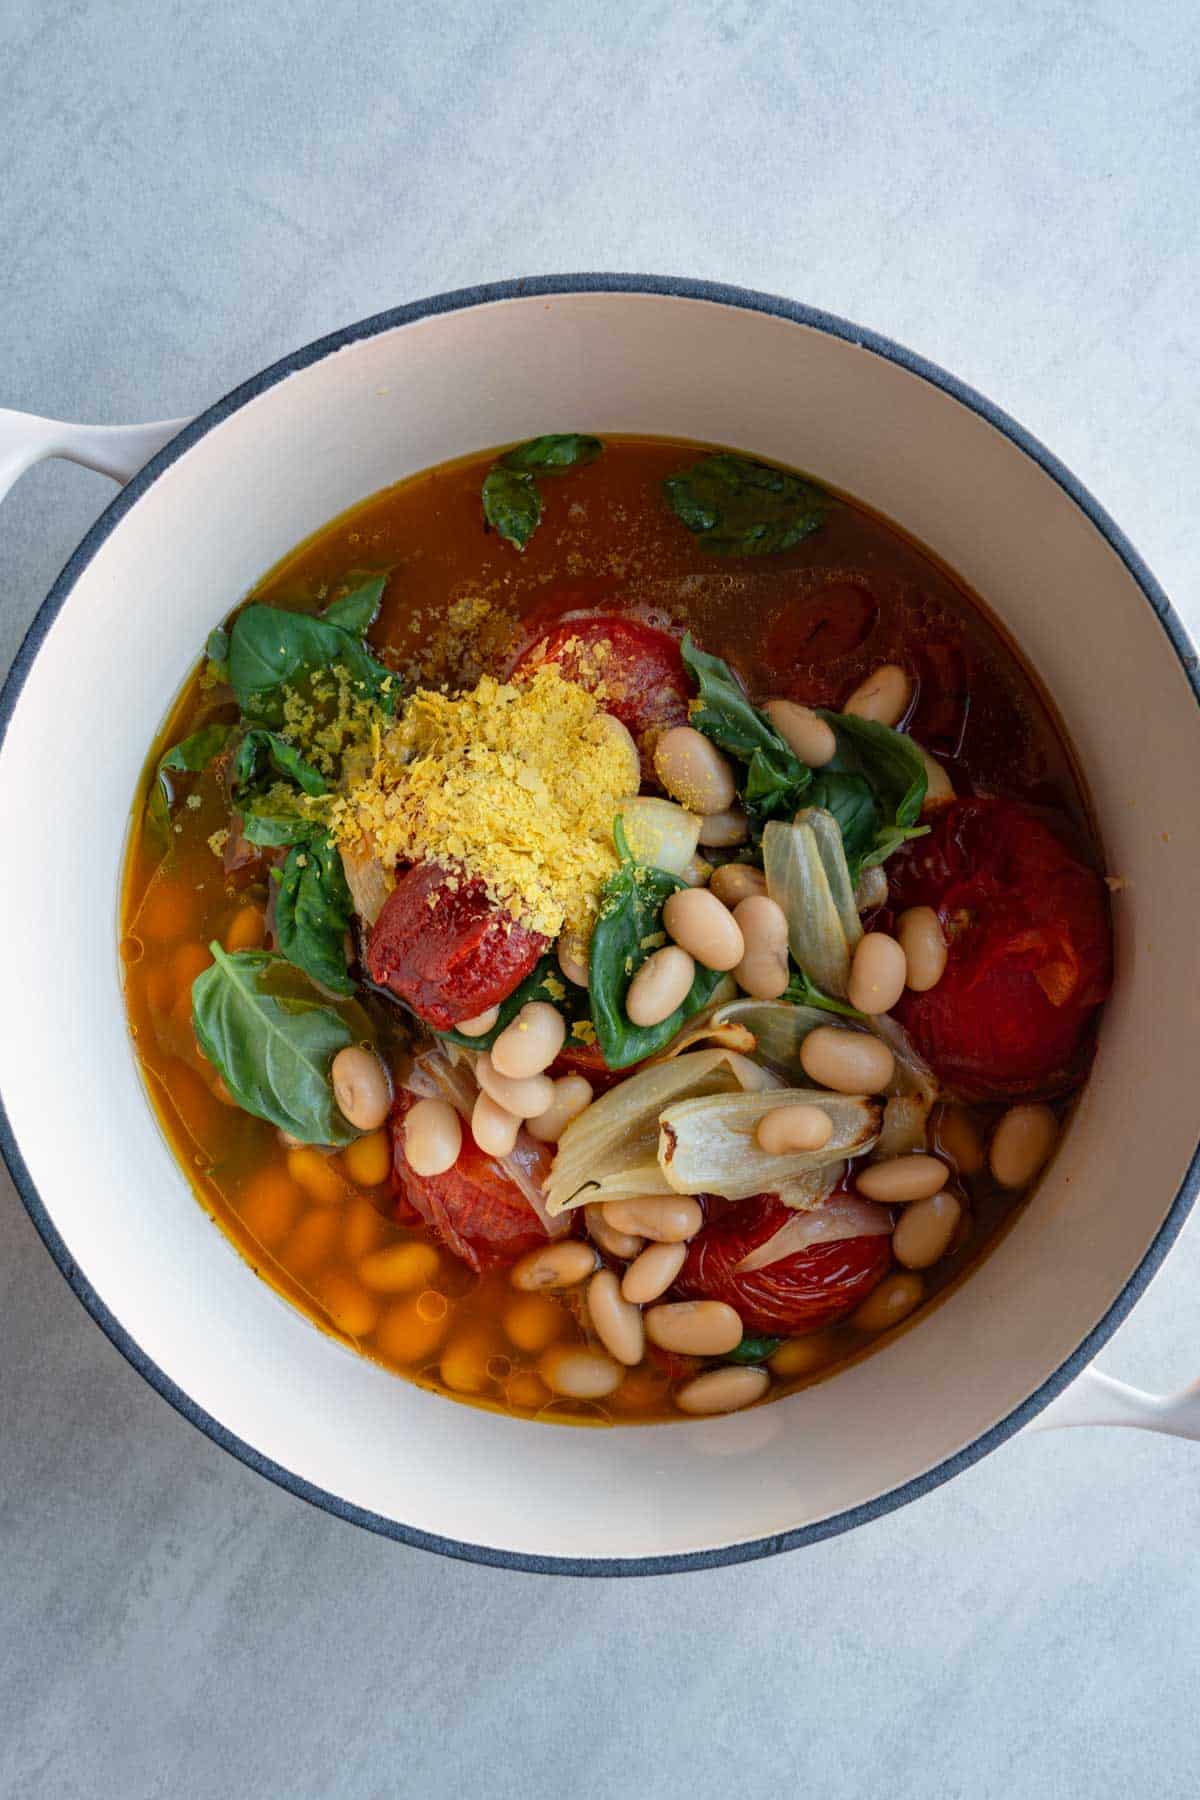 Roasted vine tomatoes, onion, garlic, as well as butter beans, nutritional yeast, and basil leaves in a large white saucepan.